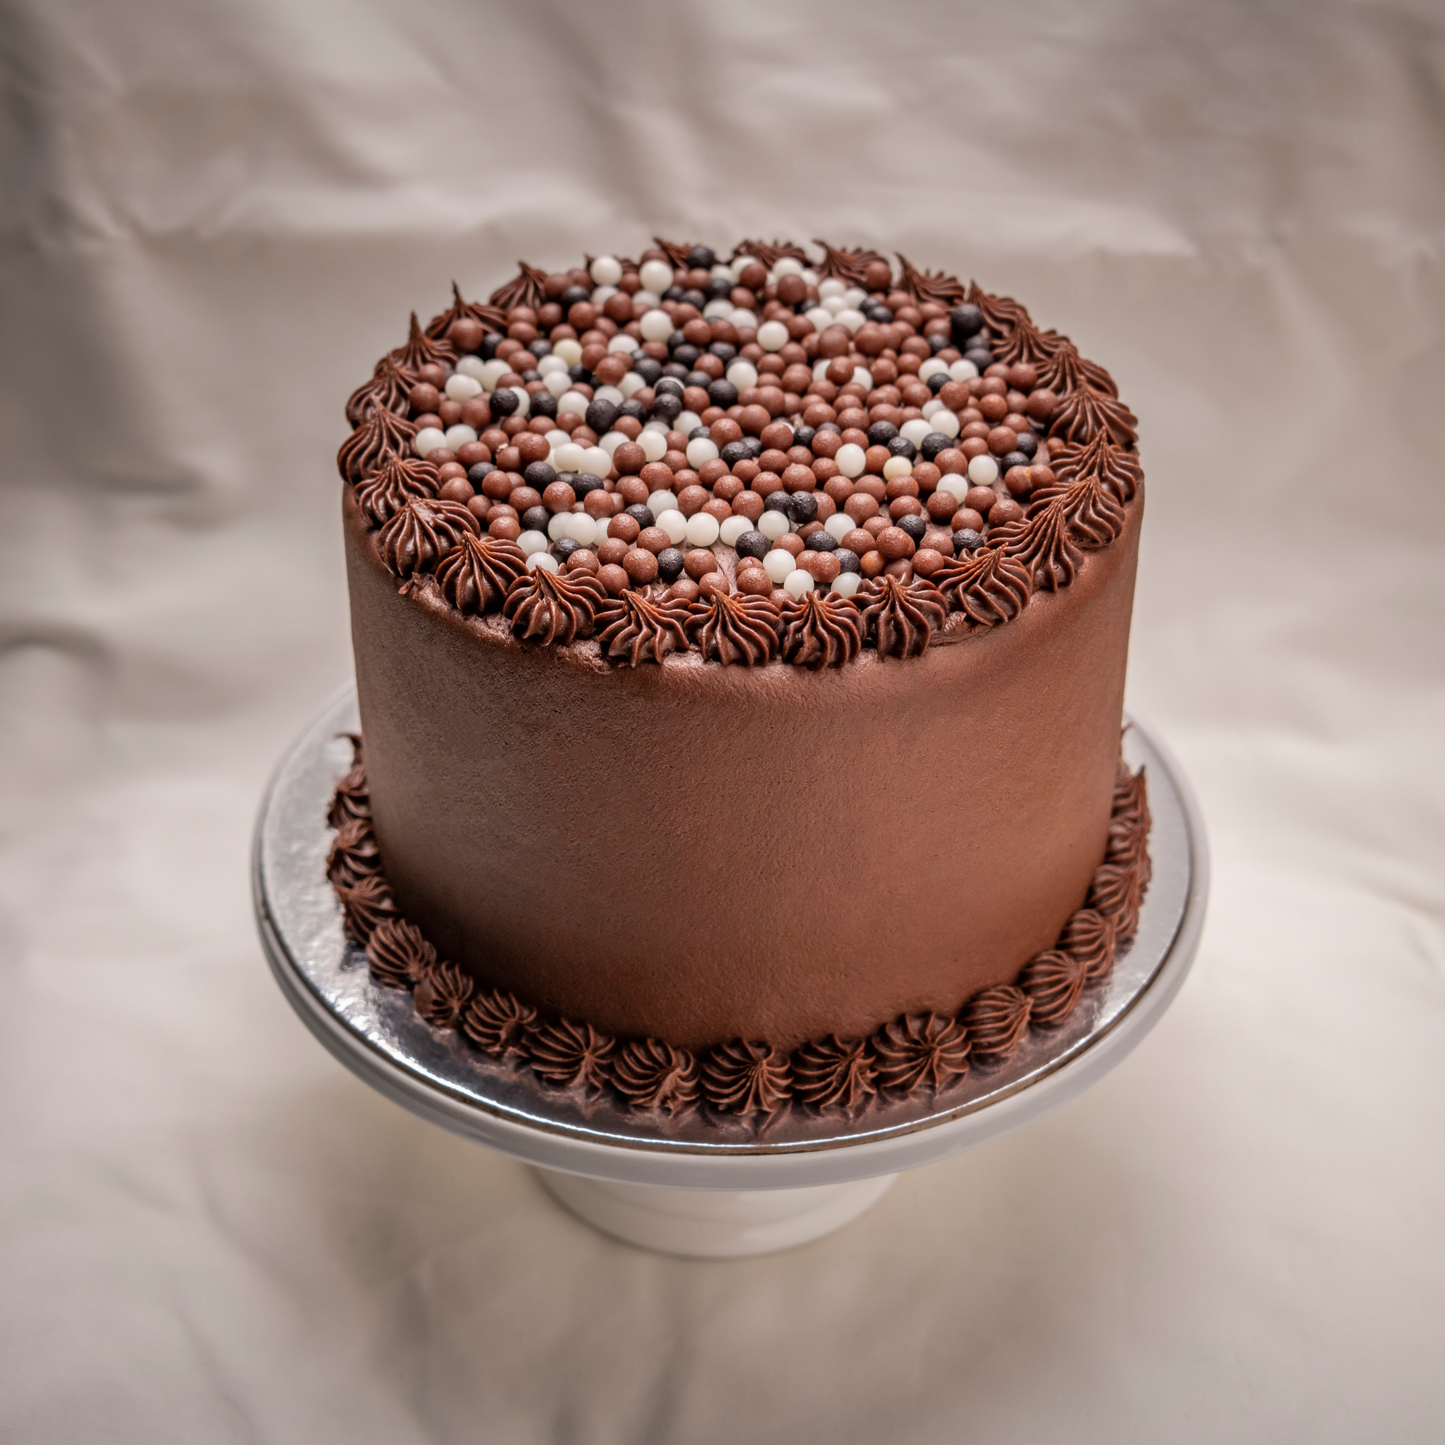 Chocolate Cake with Mousse Filling